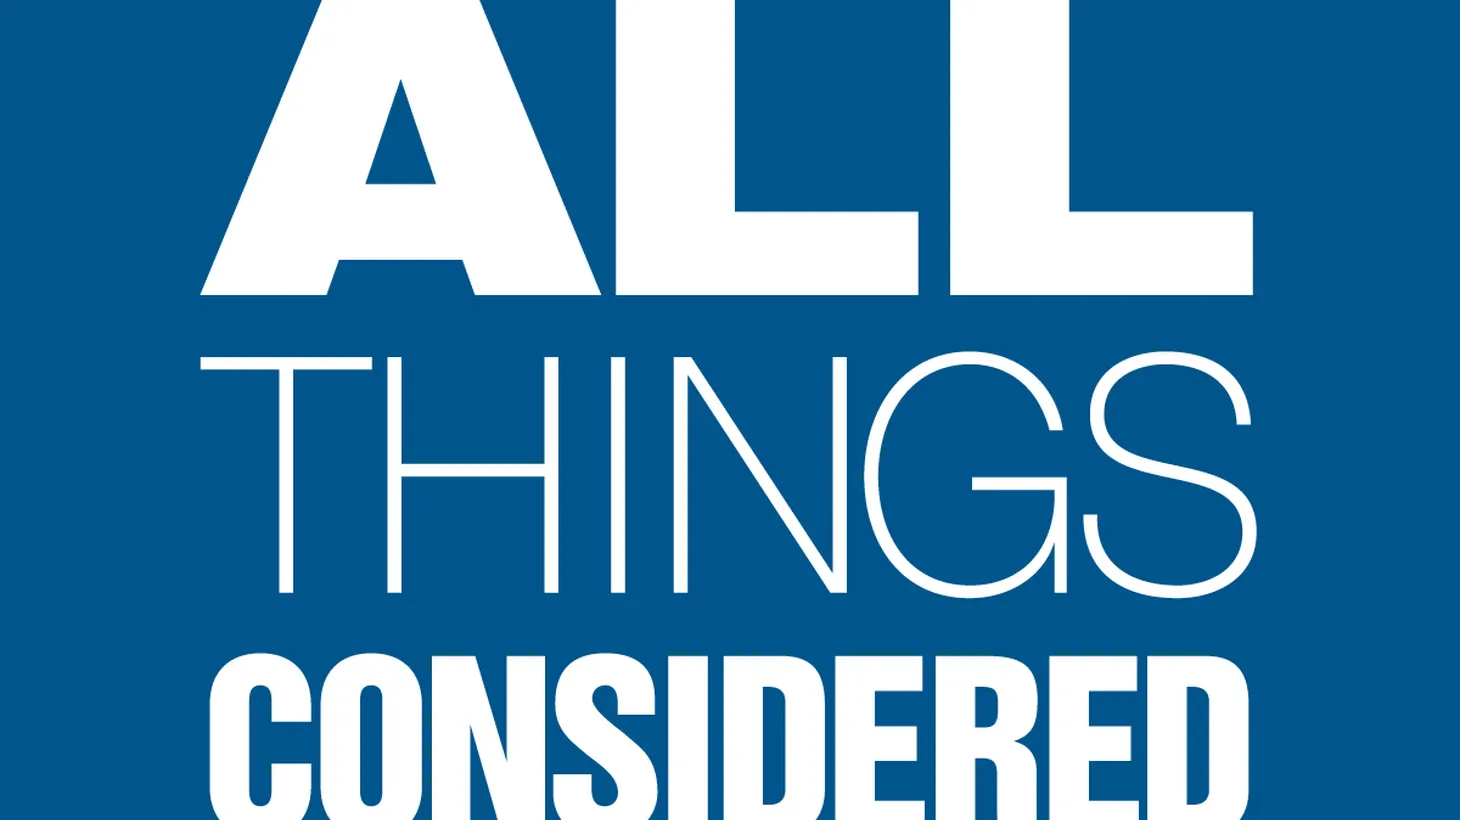 This special edition of Weekend All Things Considered includes NPR's Michel Martin's interviews with NAACP's Cornell Brooks, Baltimore state attorney Marilyn Mosby, Rev. Jim Wallis, as well as protest updates.